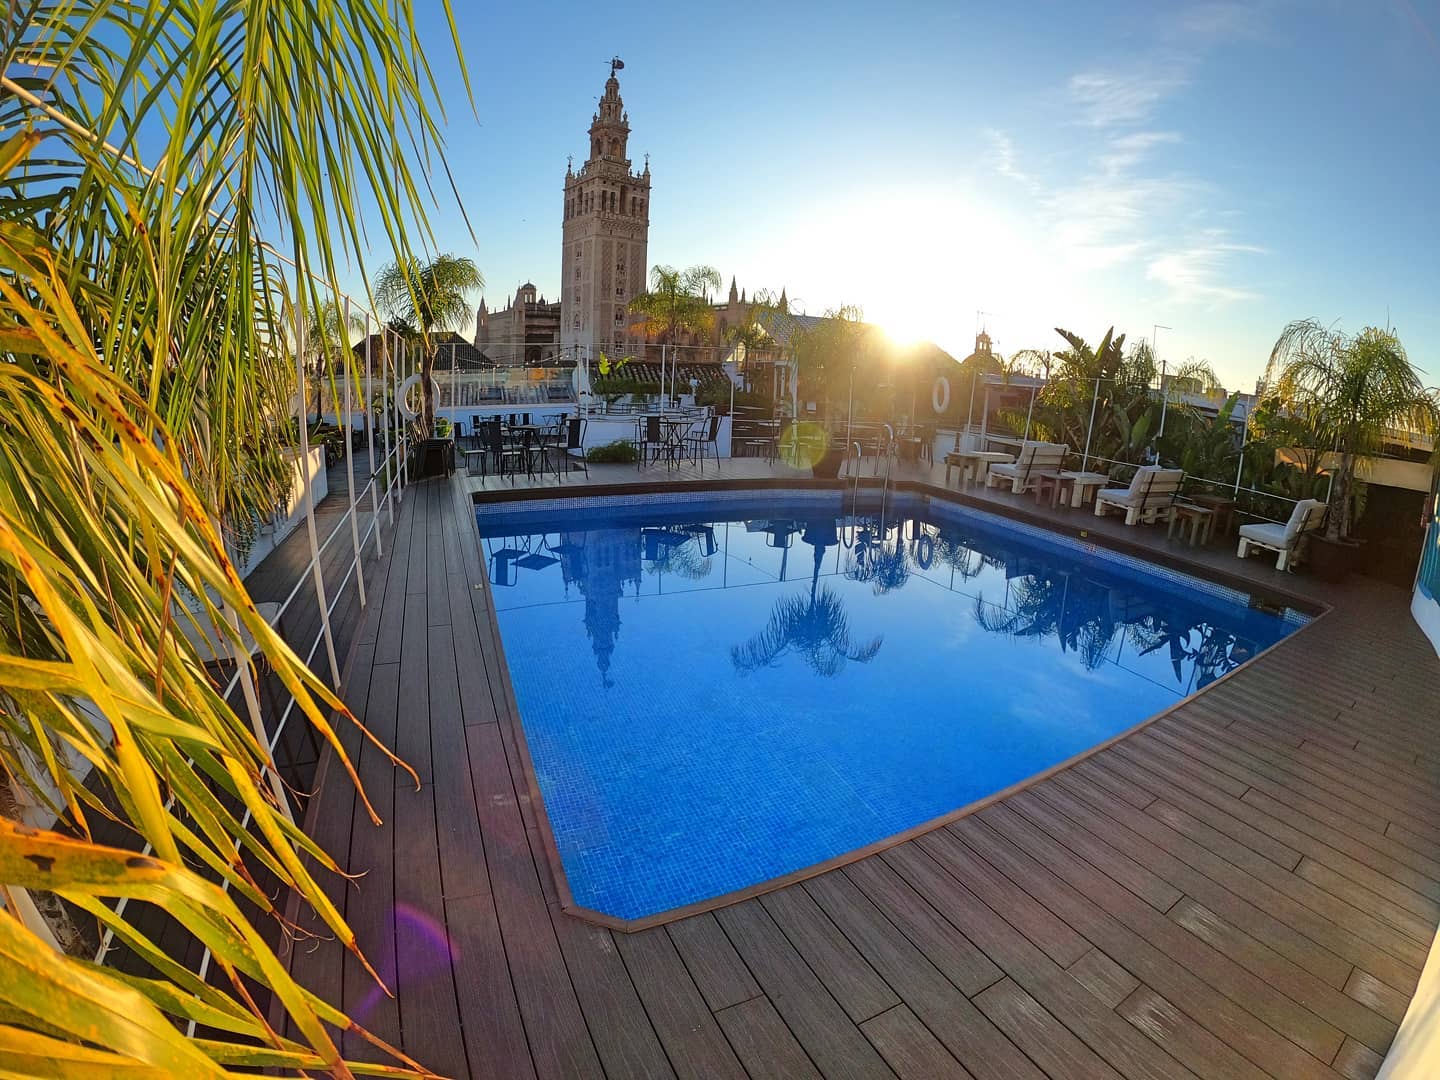 Nice hotels in Seville with a pool